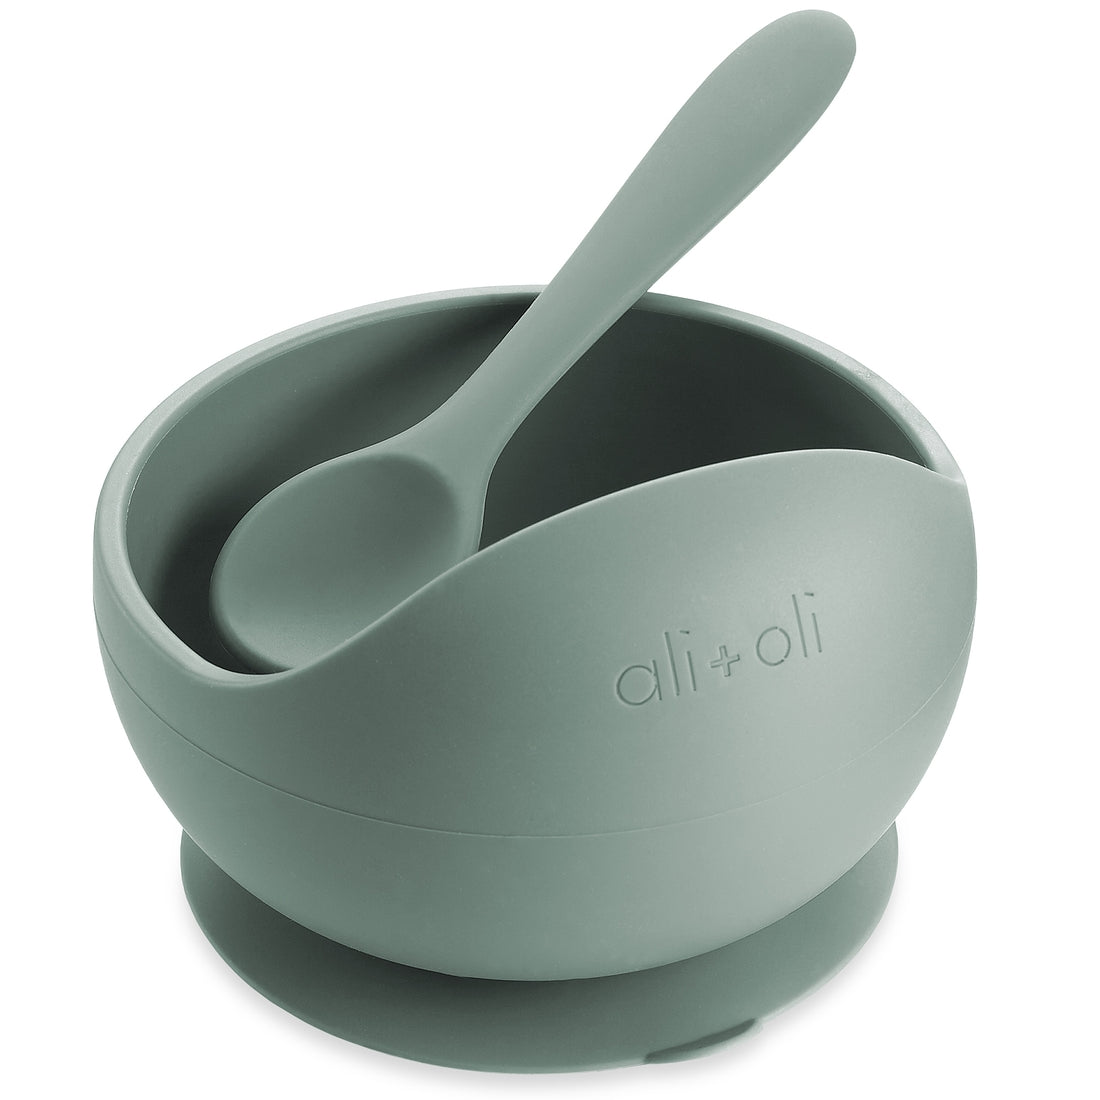 Silicone Suction Bowl & Spoon Set, Mint